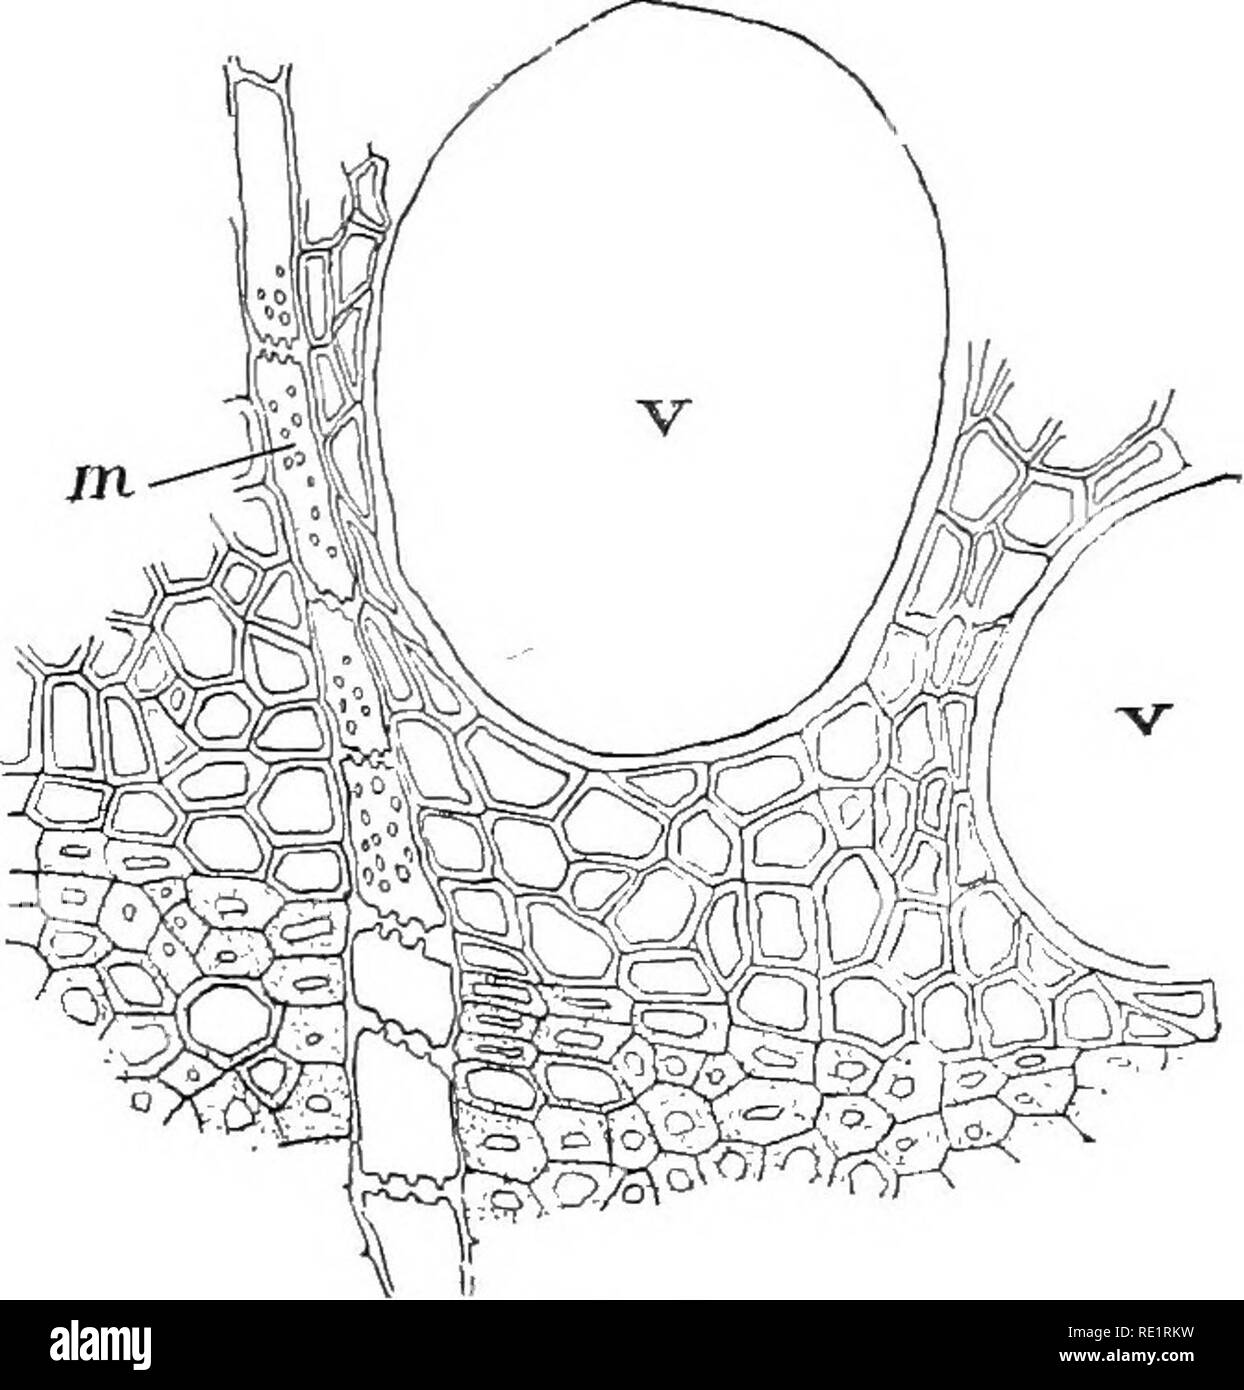 . Nature and development of plants. Botany. Fig. 56. Fig. 57. Fig. 56. Diagram of a cross-section of a stem of black oak four years old; p, pith; I, 2, 3, 4, annual rings of xylem; c, cambium cylinder; ph, phloem; cr, cortex; ck, cork; m, medullary rays. Fig. 57. Magnified view of a portion of one of the bands of black oak in Fig. 56, showing the thick-walled summer wood succeeded by the thinner- walled cells and vessels. This association of cells causes the banded appear- ance of the annual rings of growth, m, medullary rays; 11, vessels in the spring wood. produces firmer and denser tissues. Stock Photo